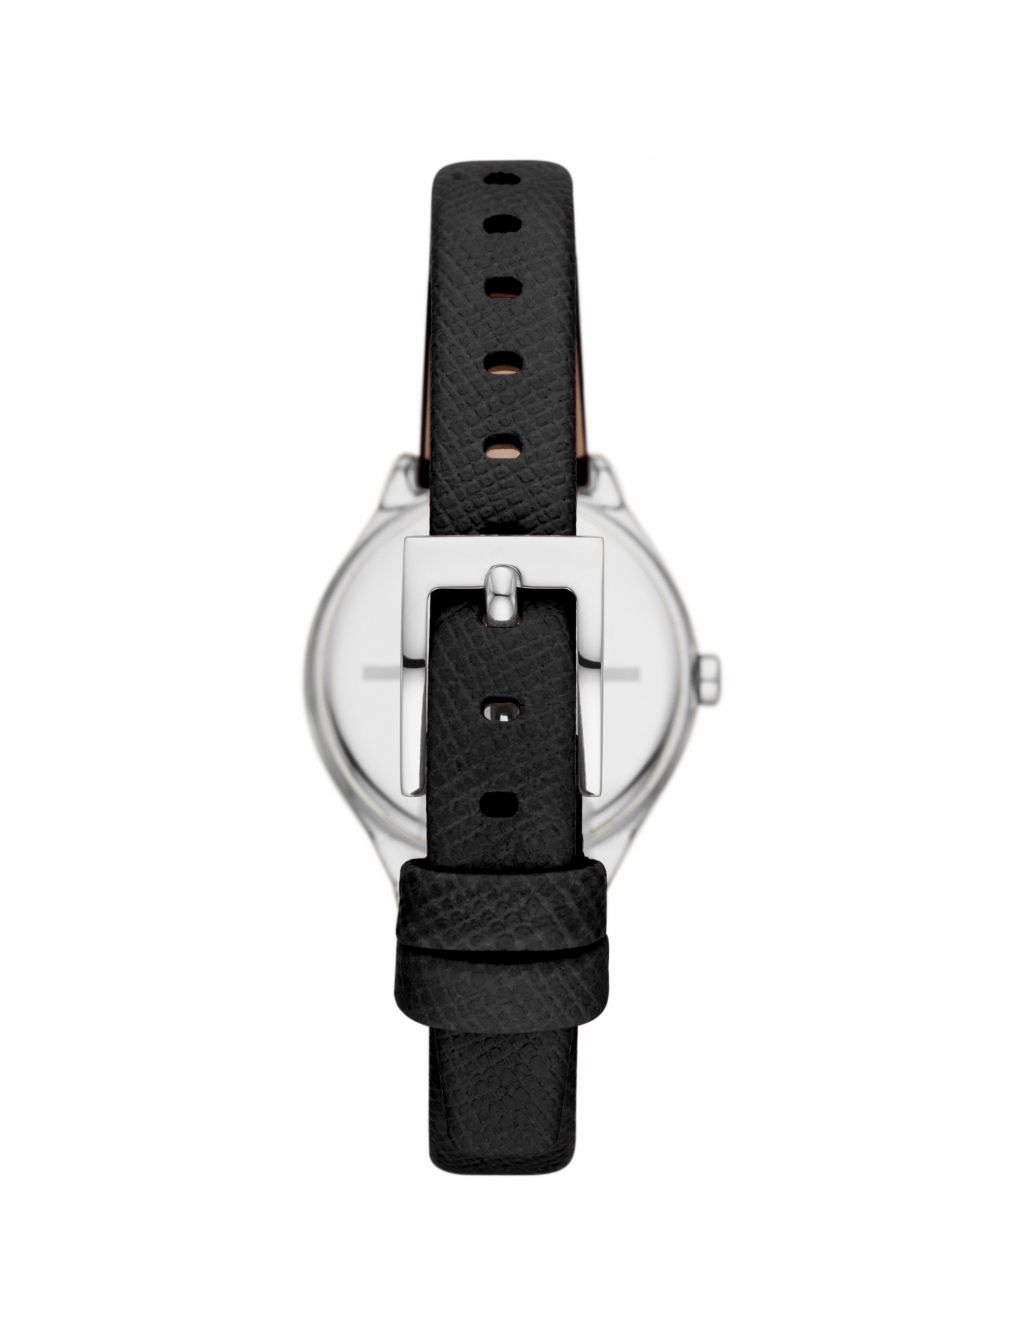 DKNY Parsons Black Leather Watch image 2